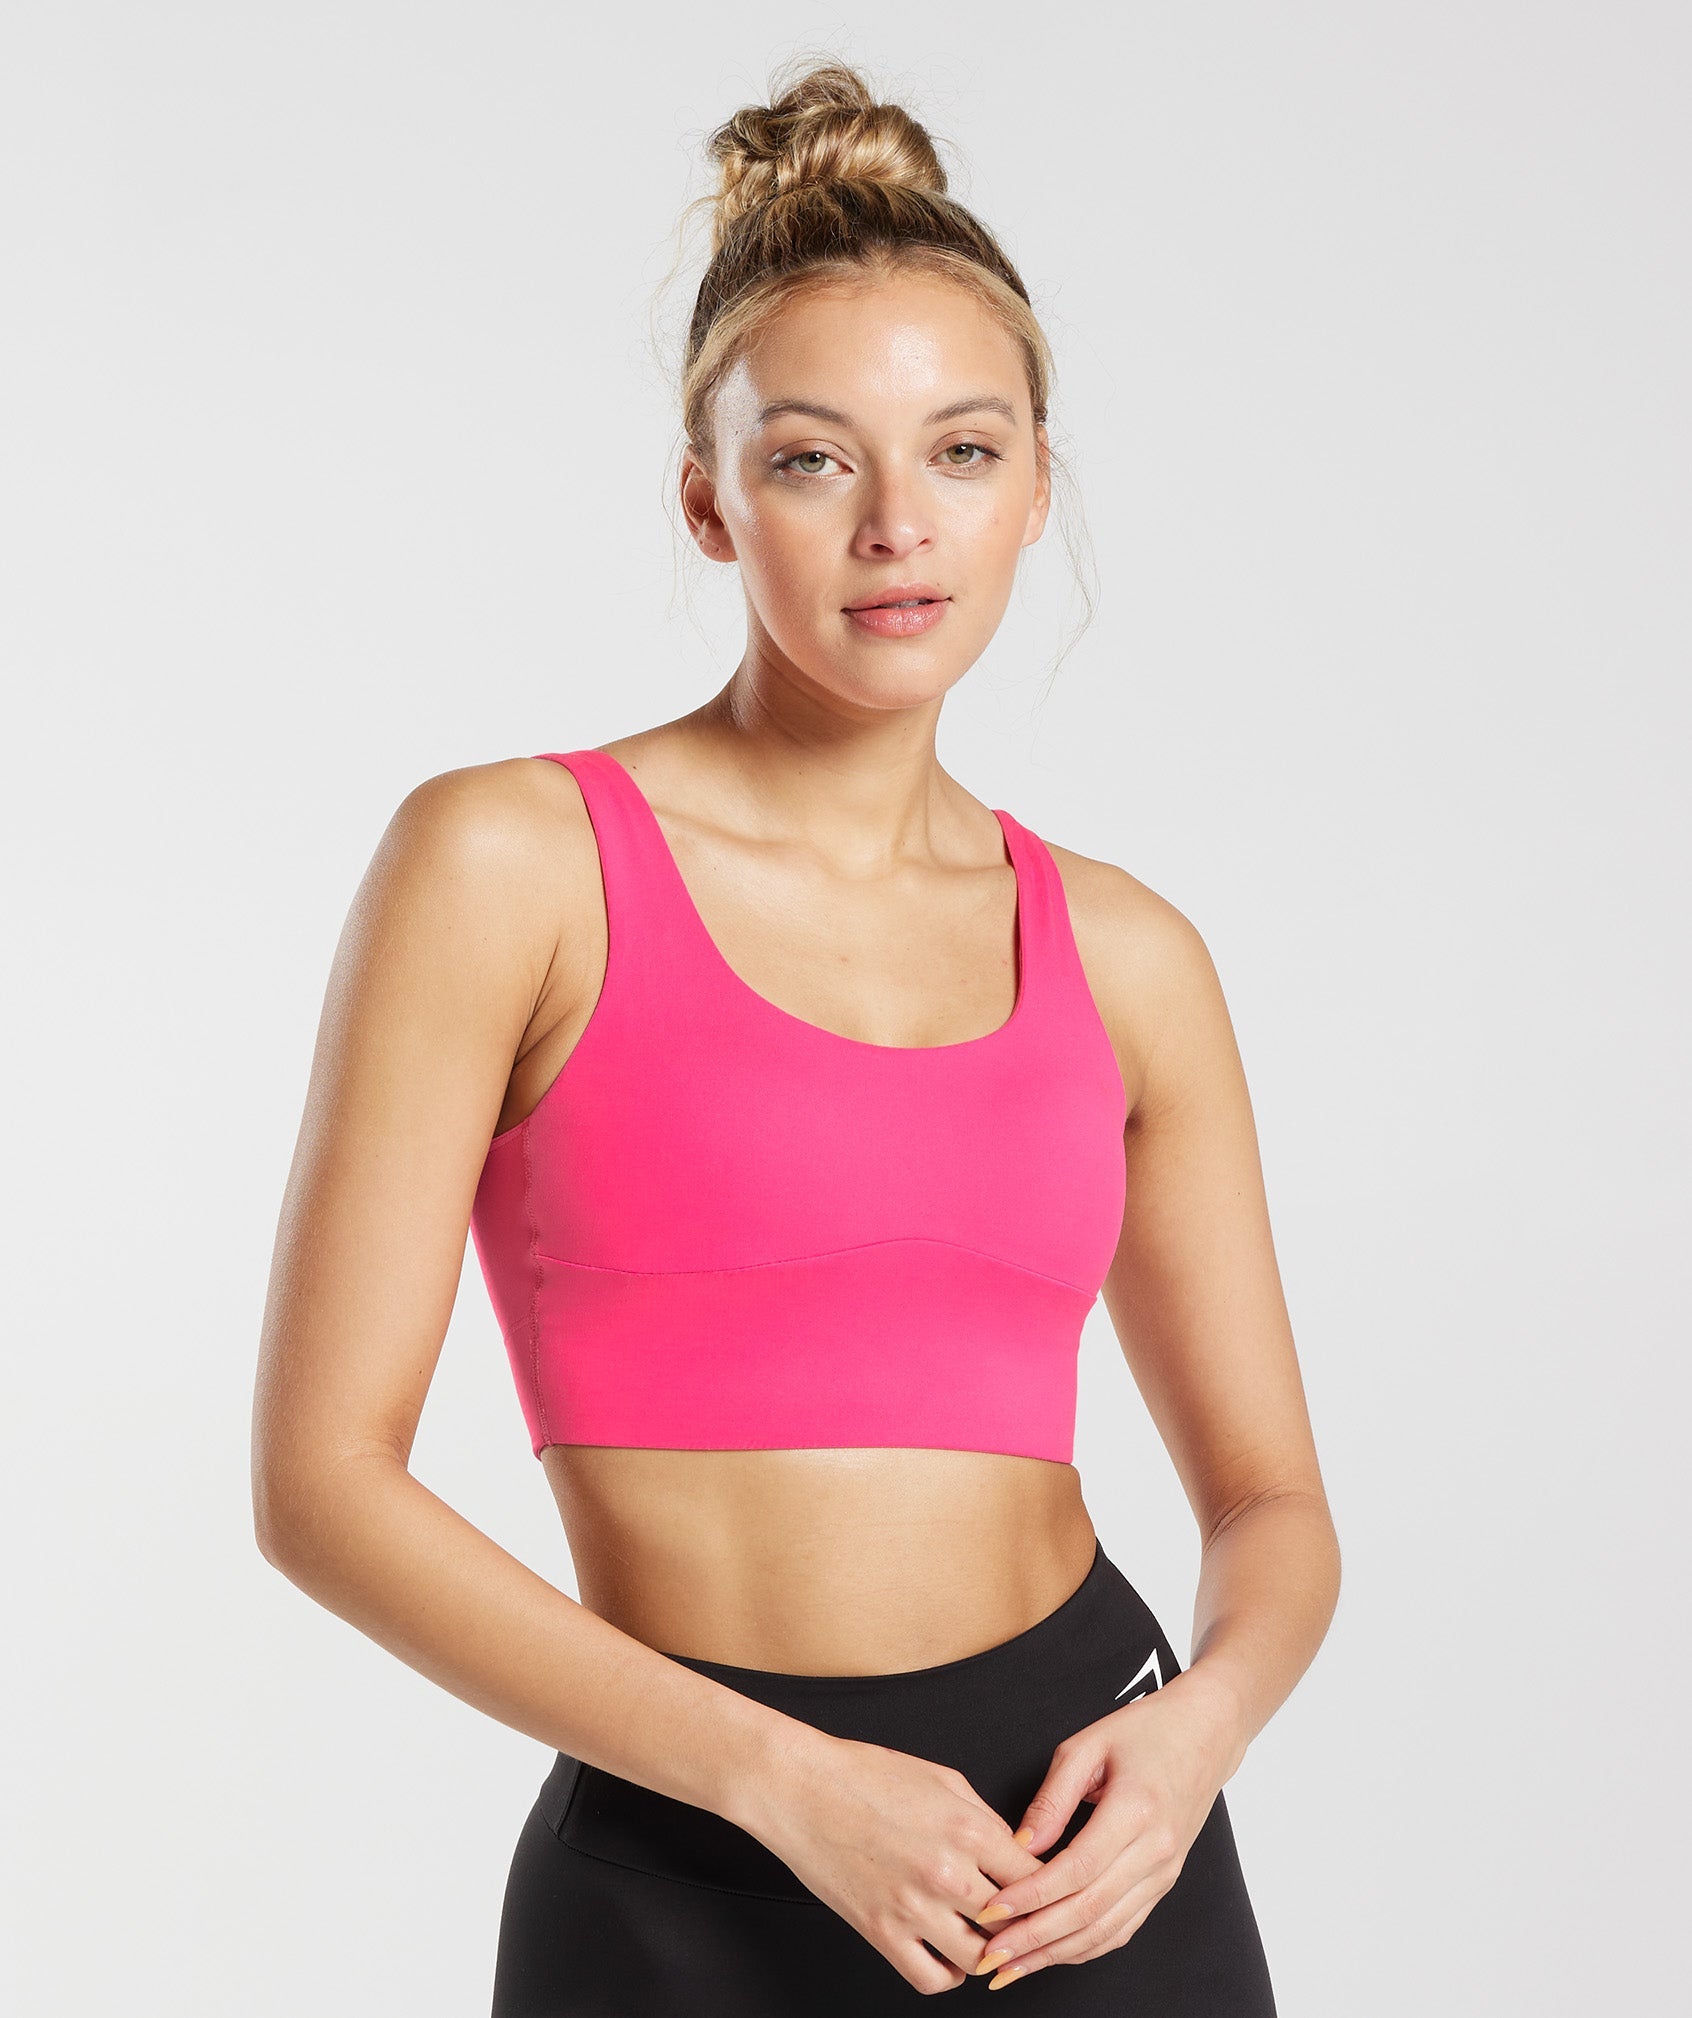 PAXCOO Bralettes for Women Pack of 6, Sports Bras for Women